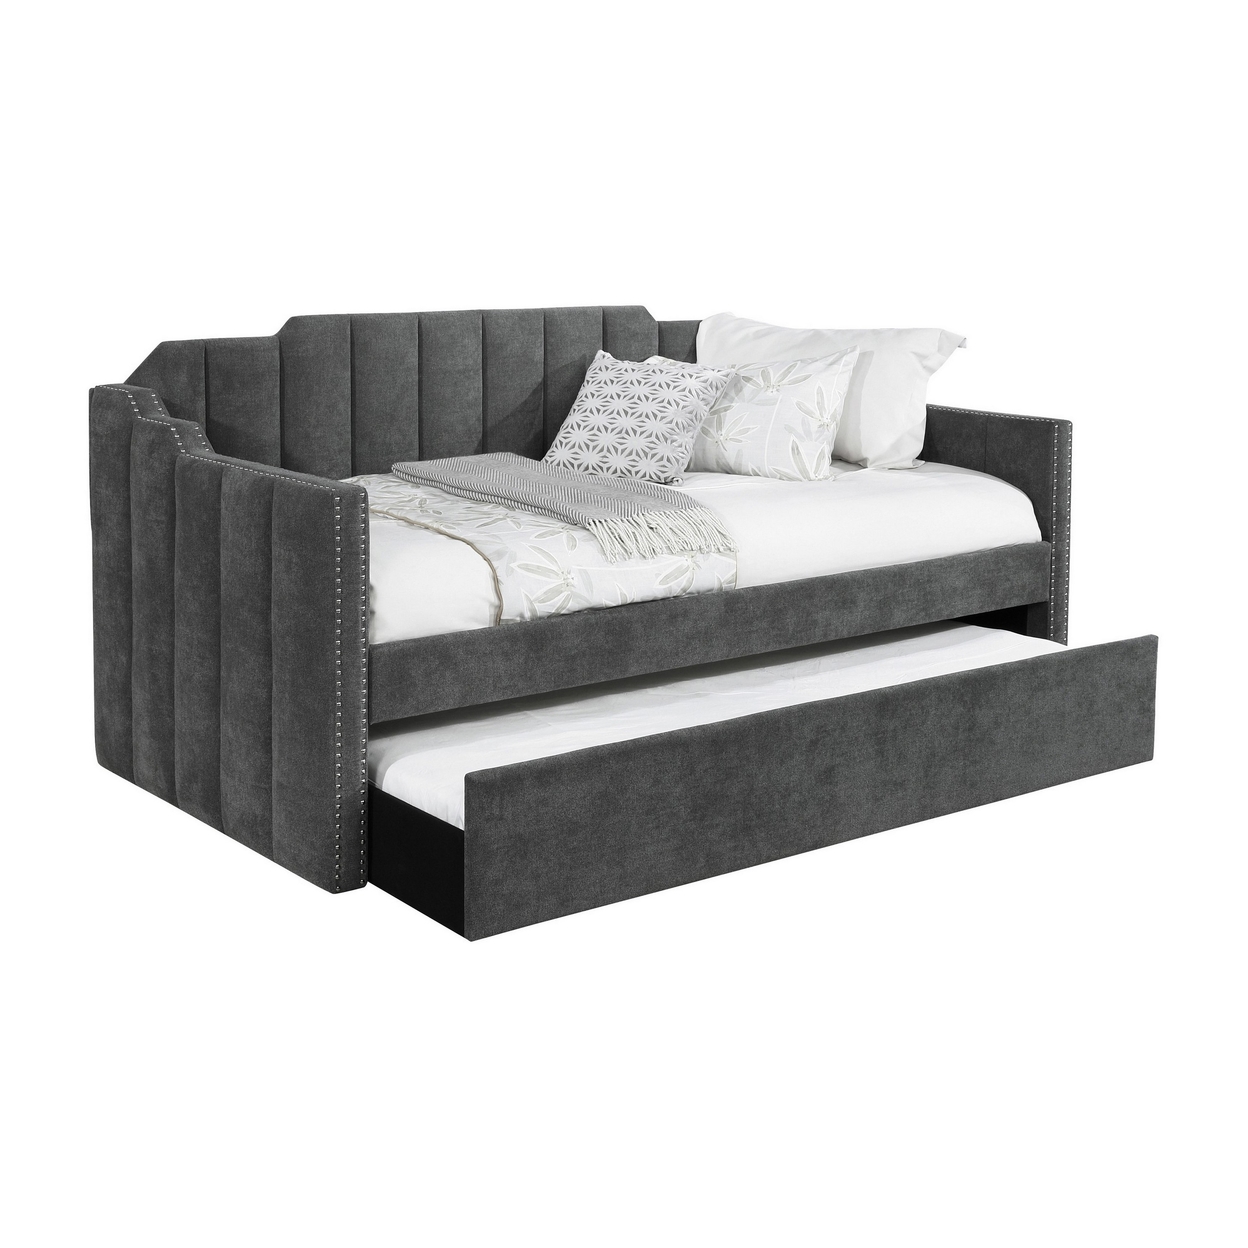 Tara Notched Twin Daybed With Trundle, Nailheads, Gray Velvet Upholstery- Saltoro Sherpi